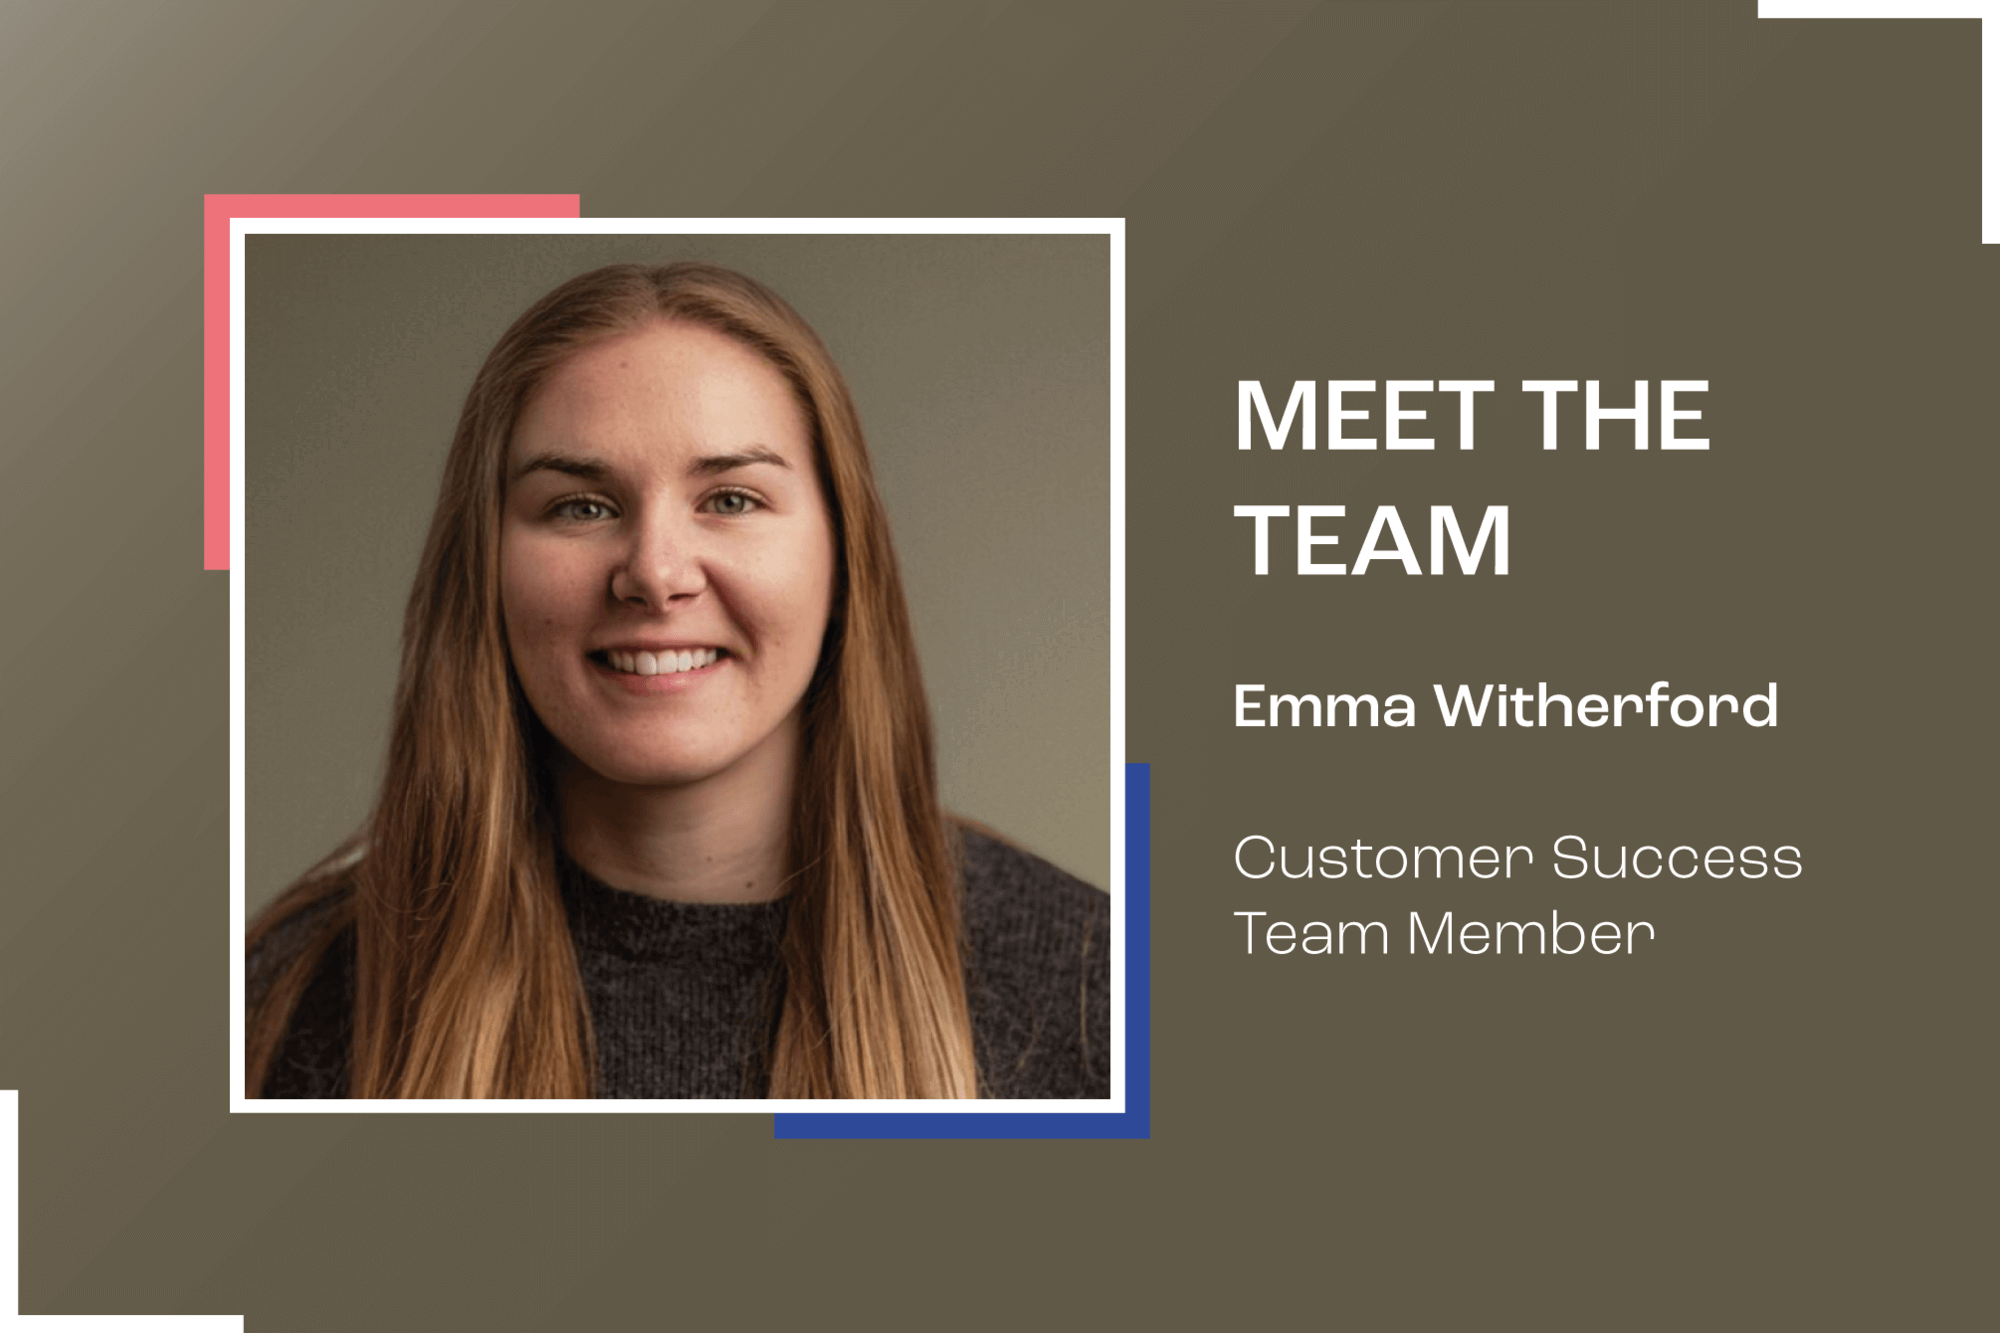 Meet The Team: Emma Witherford